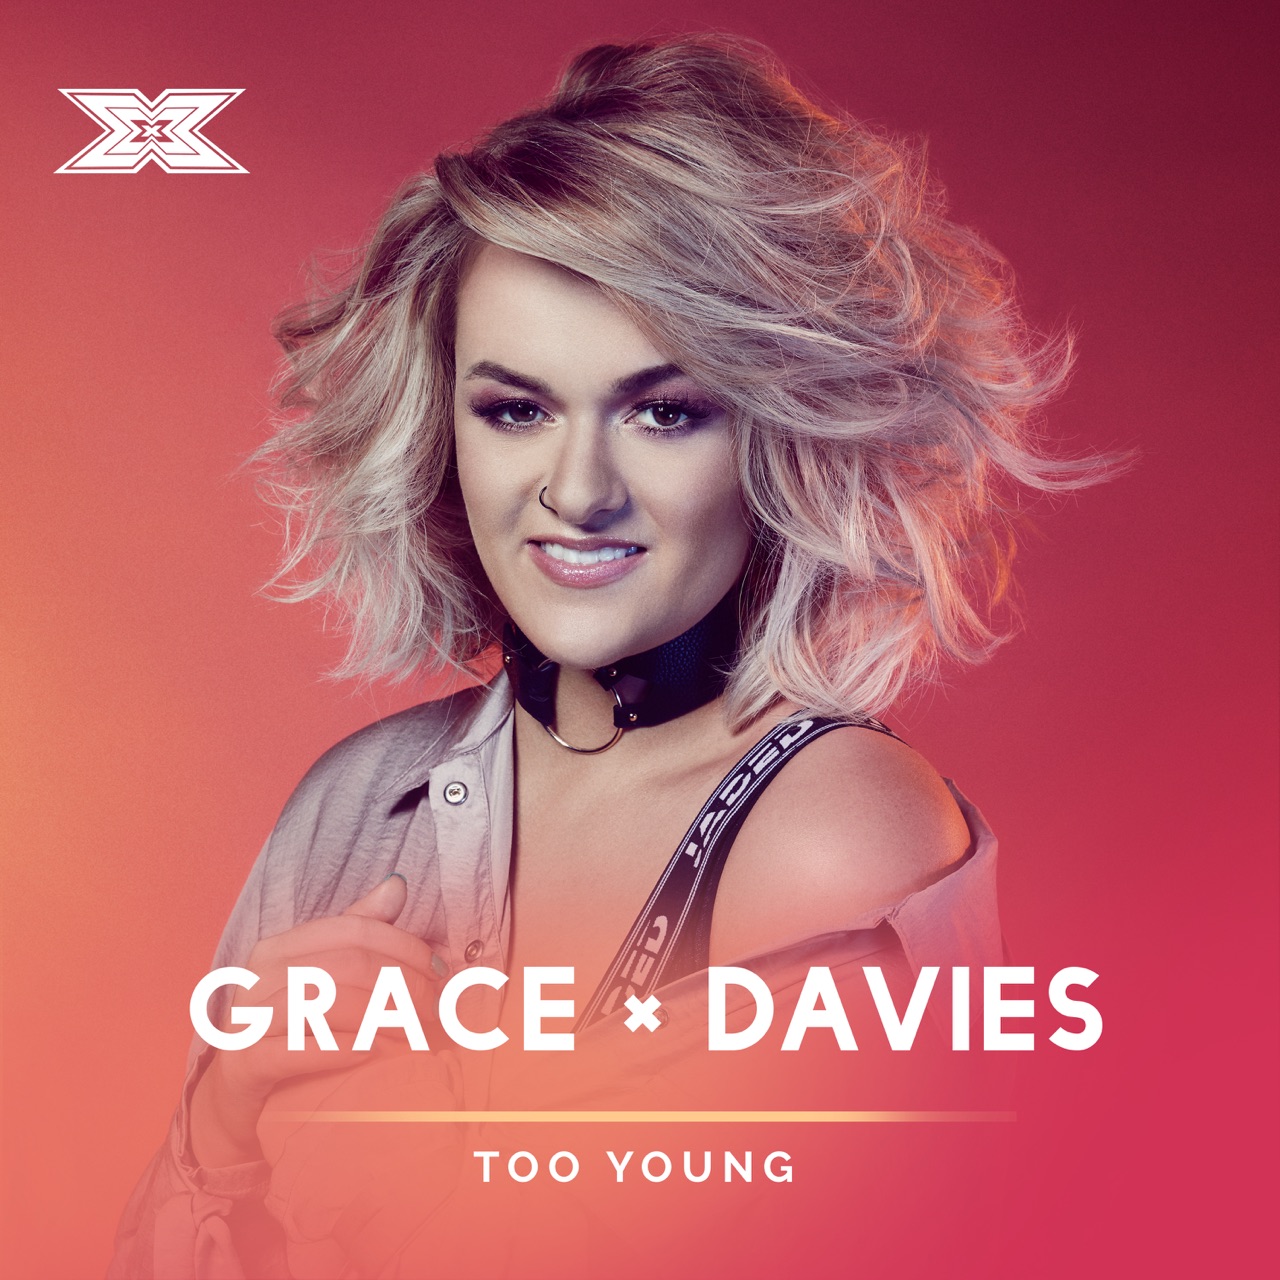 Grace Davies — Too Young (X Factor Recording) cover artwork